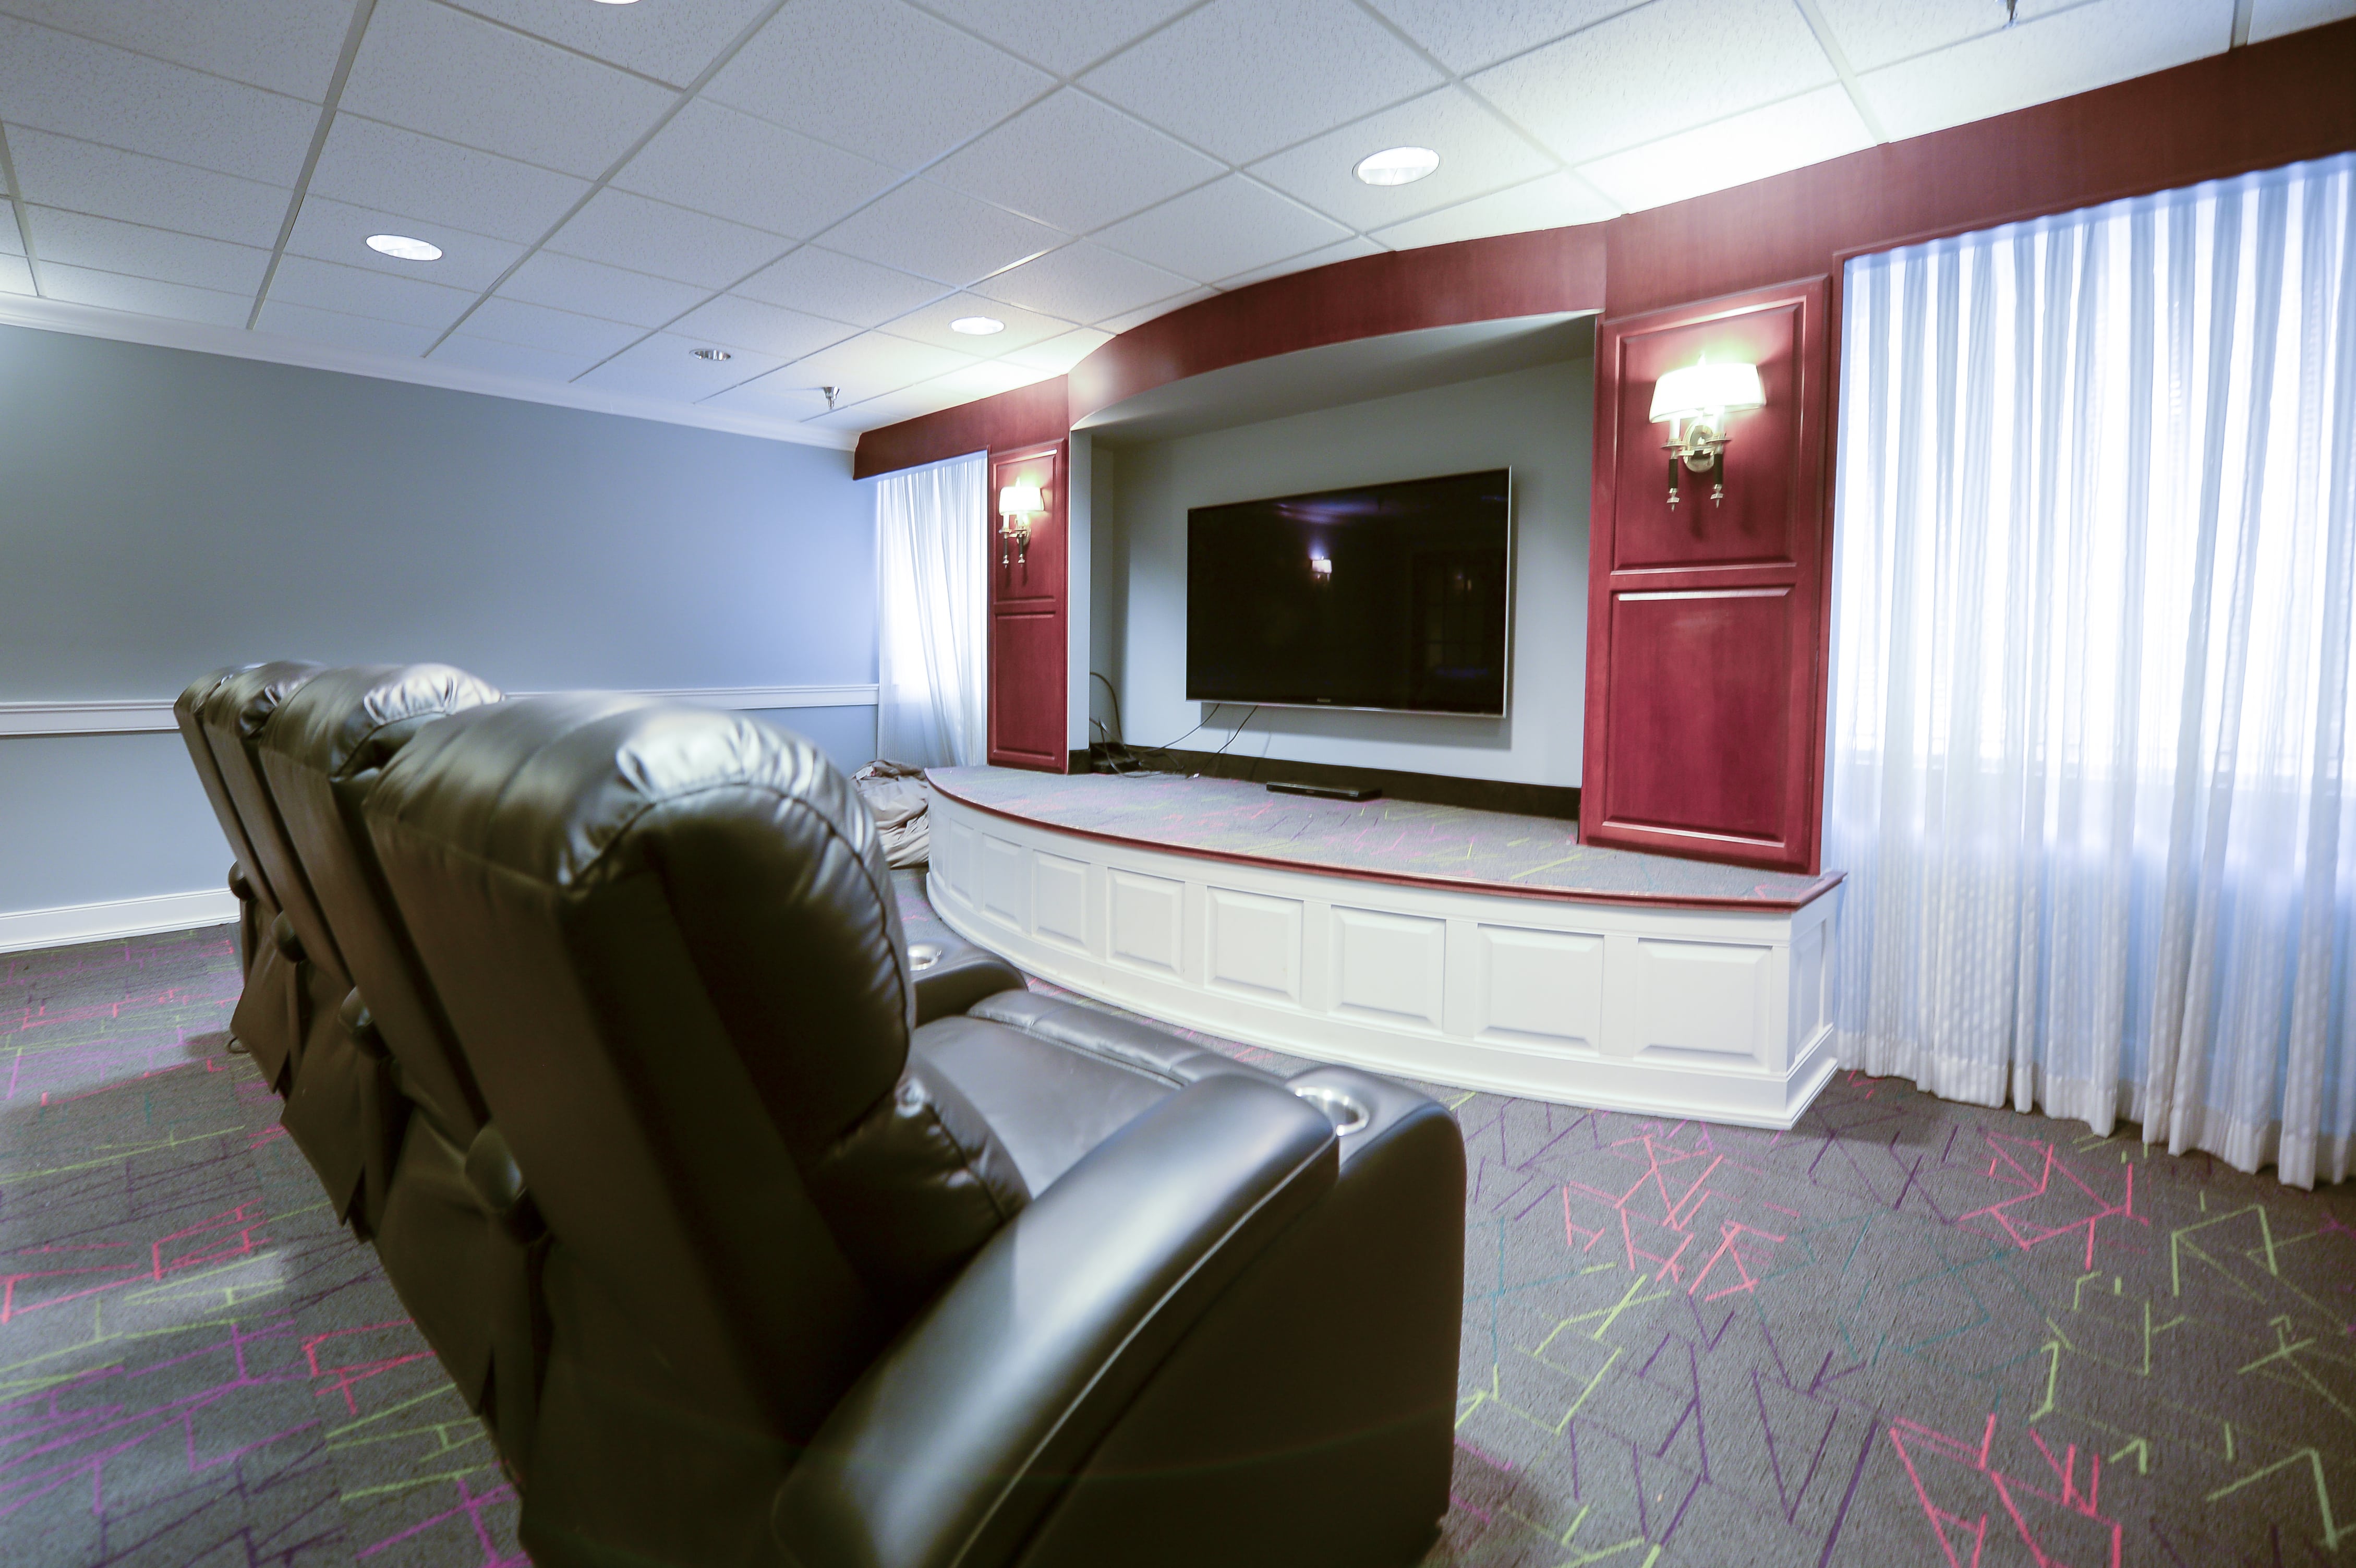 Residence on Fifth Movie Lounge - recliner chairs and a large tv